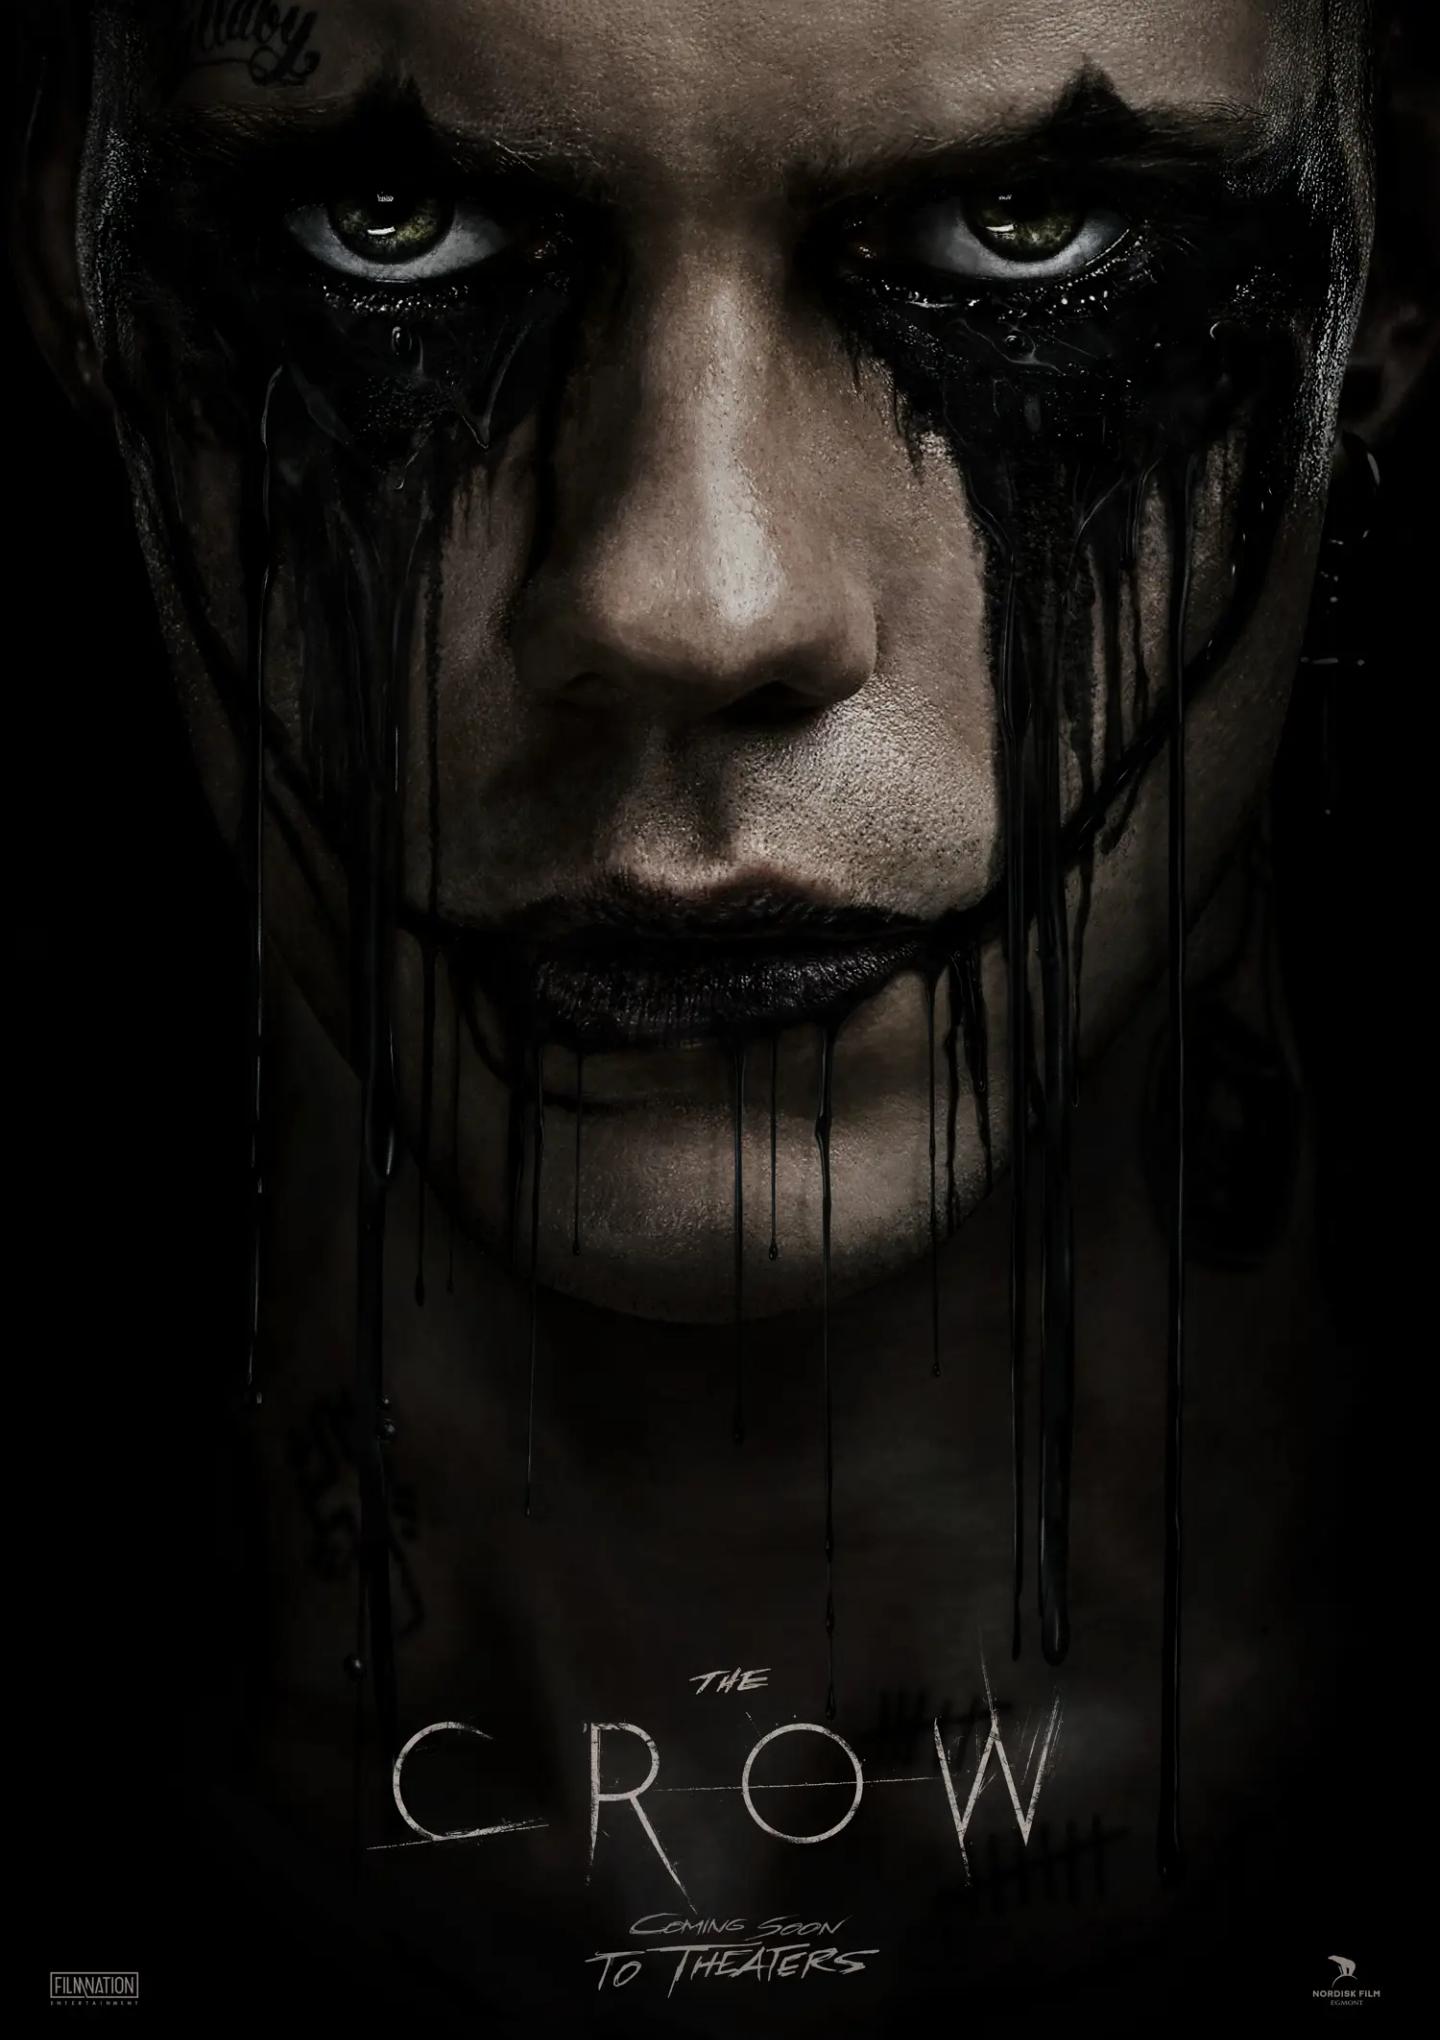 Plakat for 'The Crow'